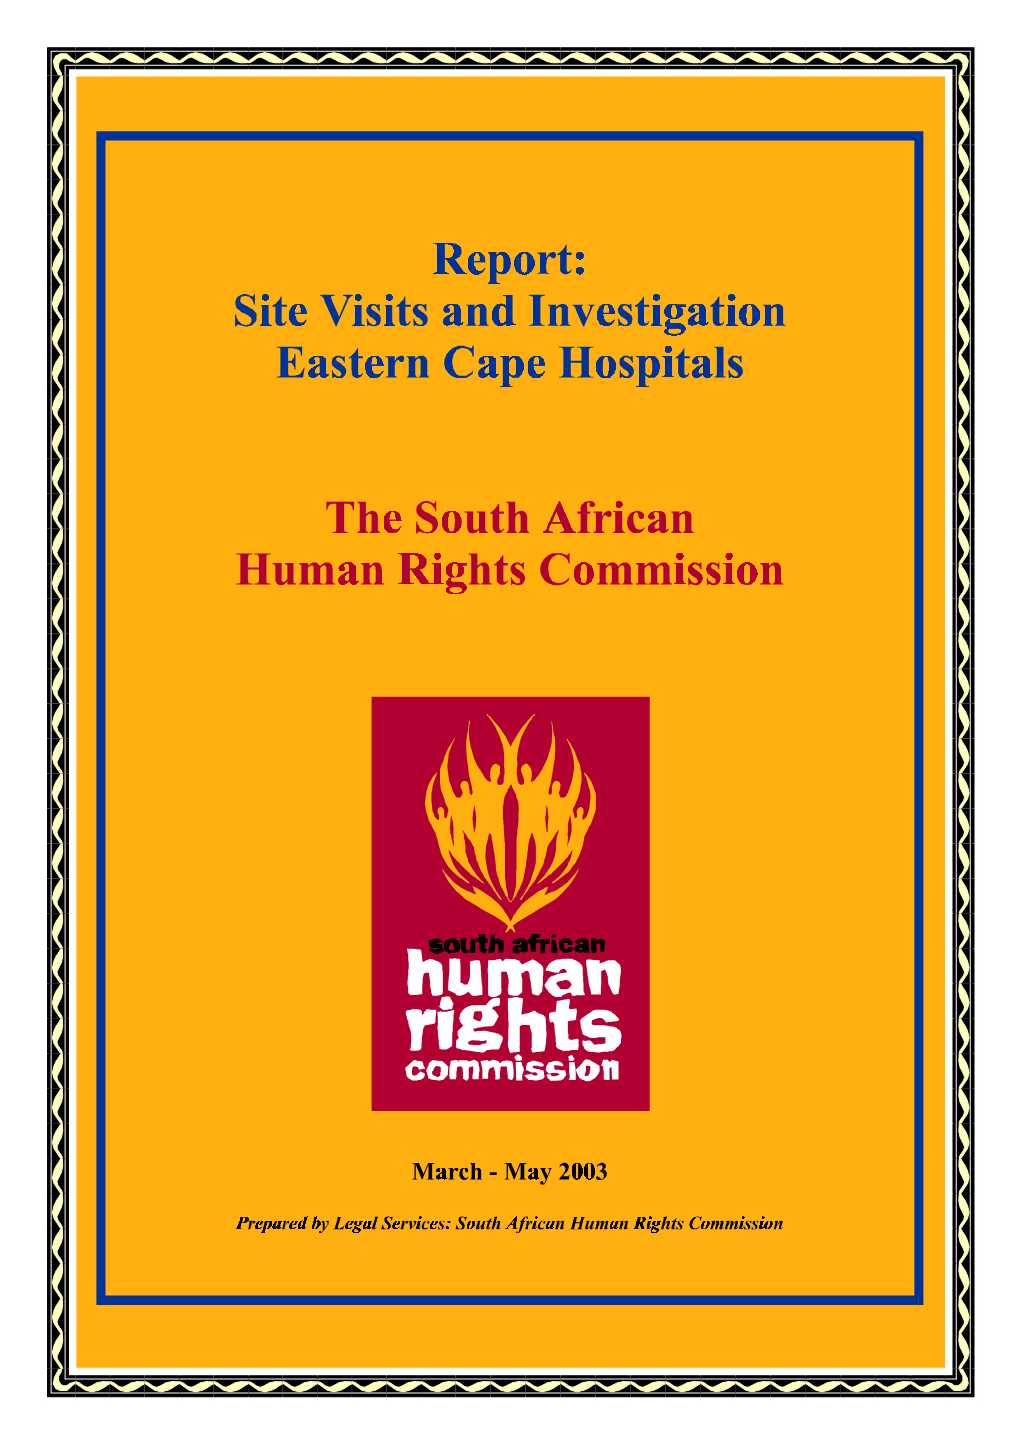 Site Visits to Eastern Cape Hospitals